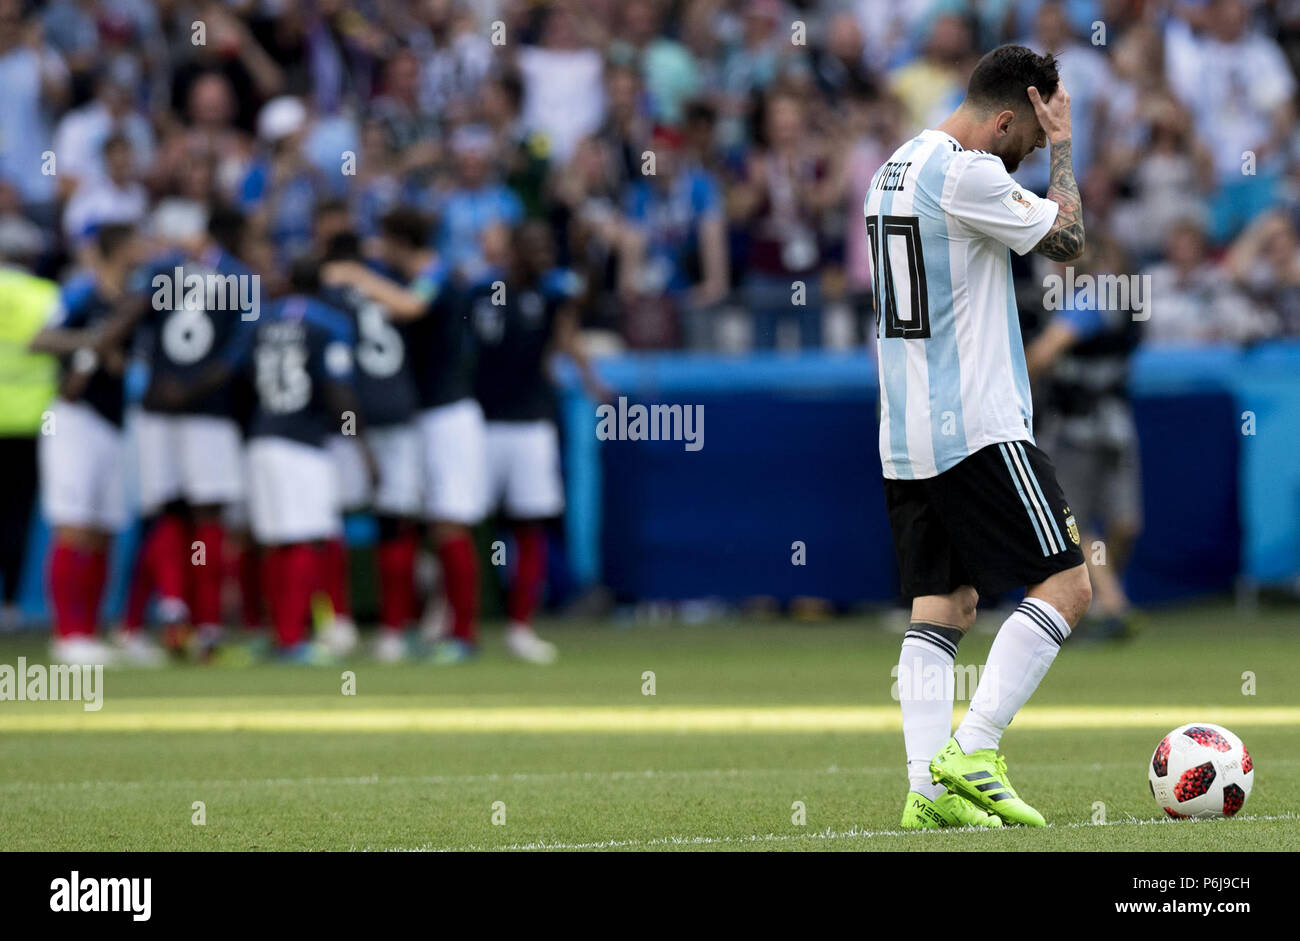 Kazan, Russia. 30th June, 2018. Football World Cup, France vs Argentina at the Kazan Arena. Lionel Messi (r) of Argentina reacts as France players celebrate a goal. Credit: Cezaro De Luca/dpa/Alamy Live News Stock Photo